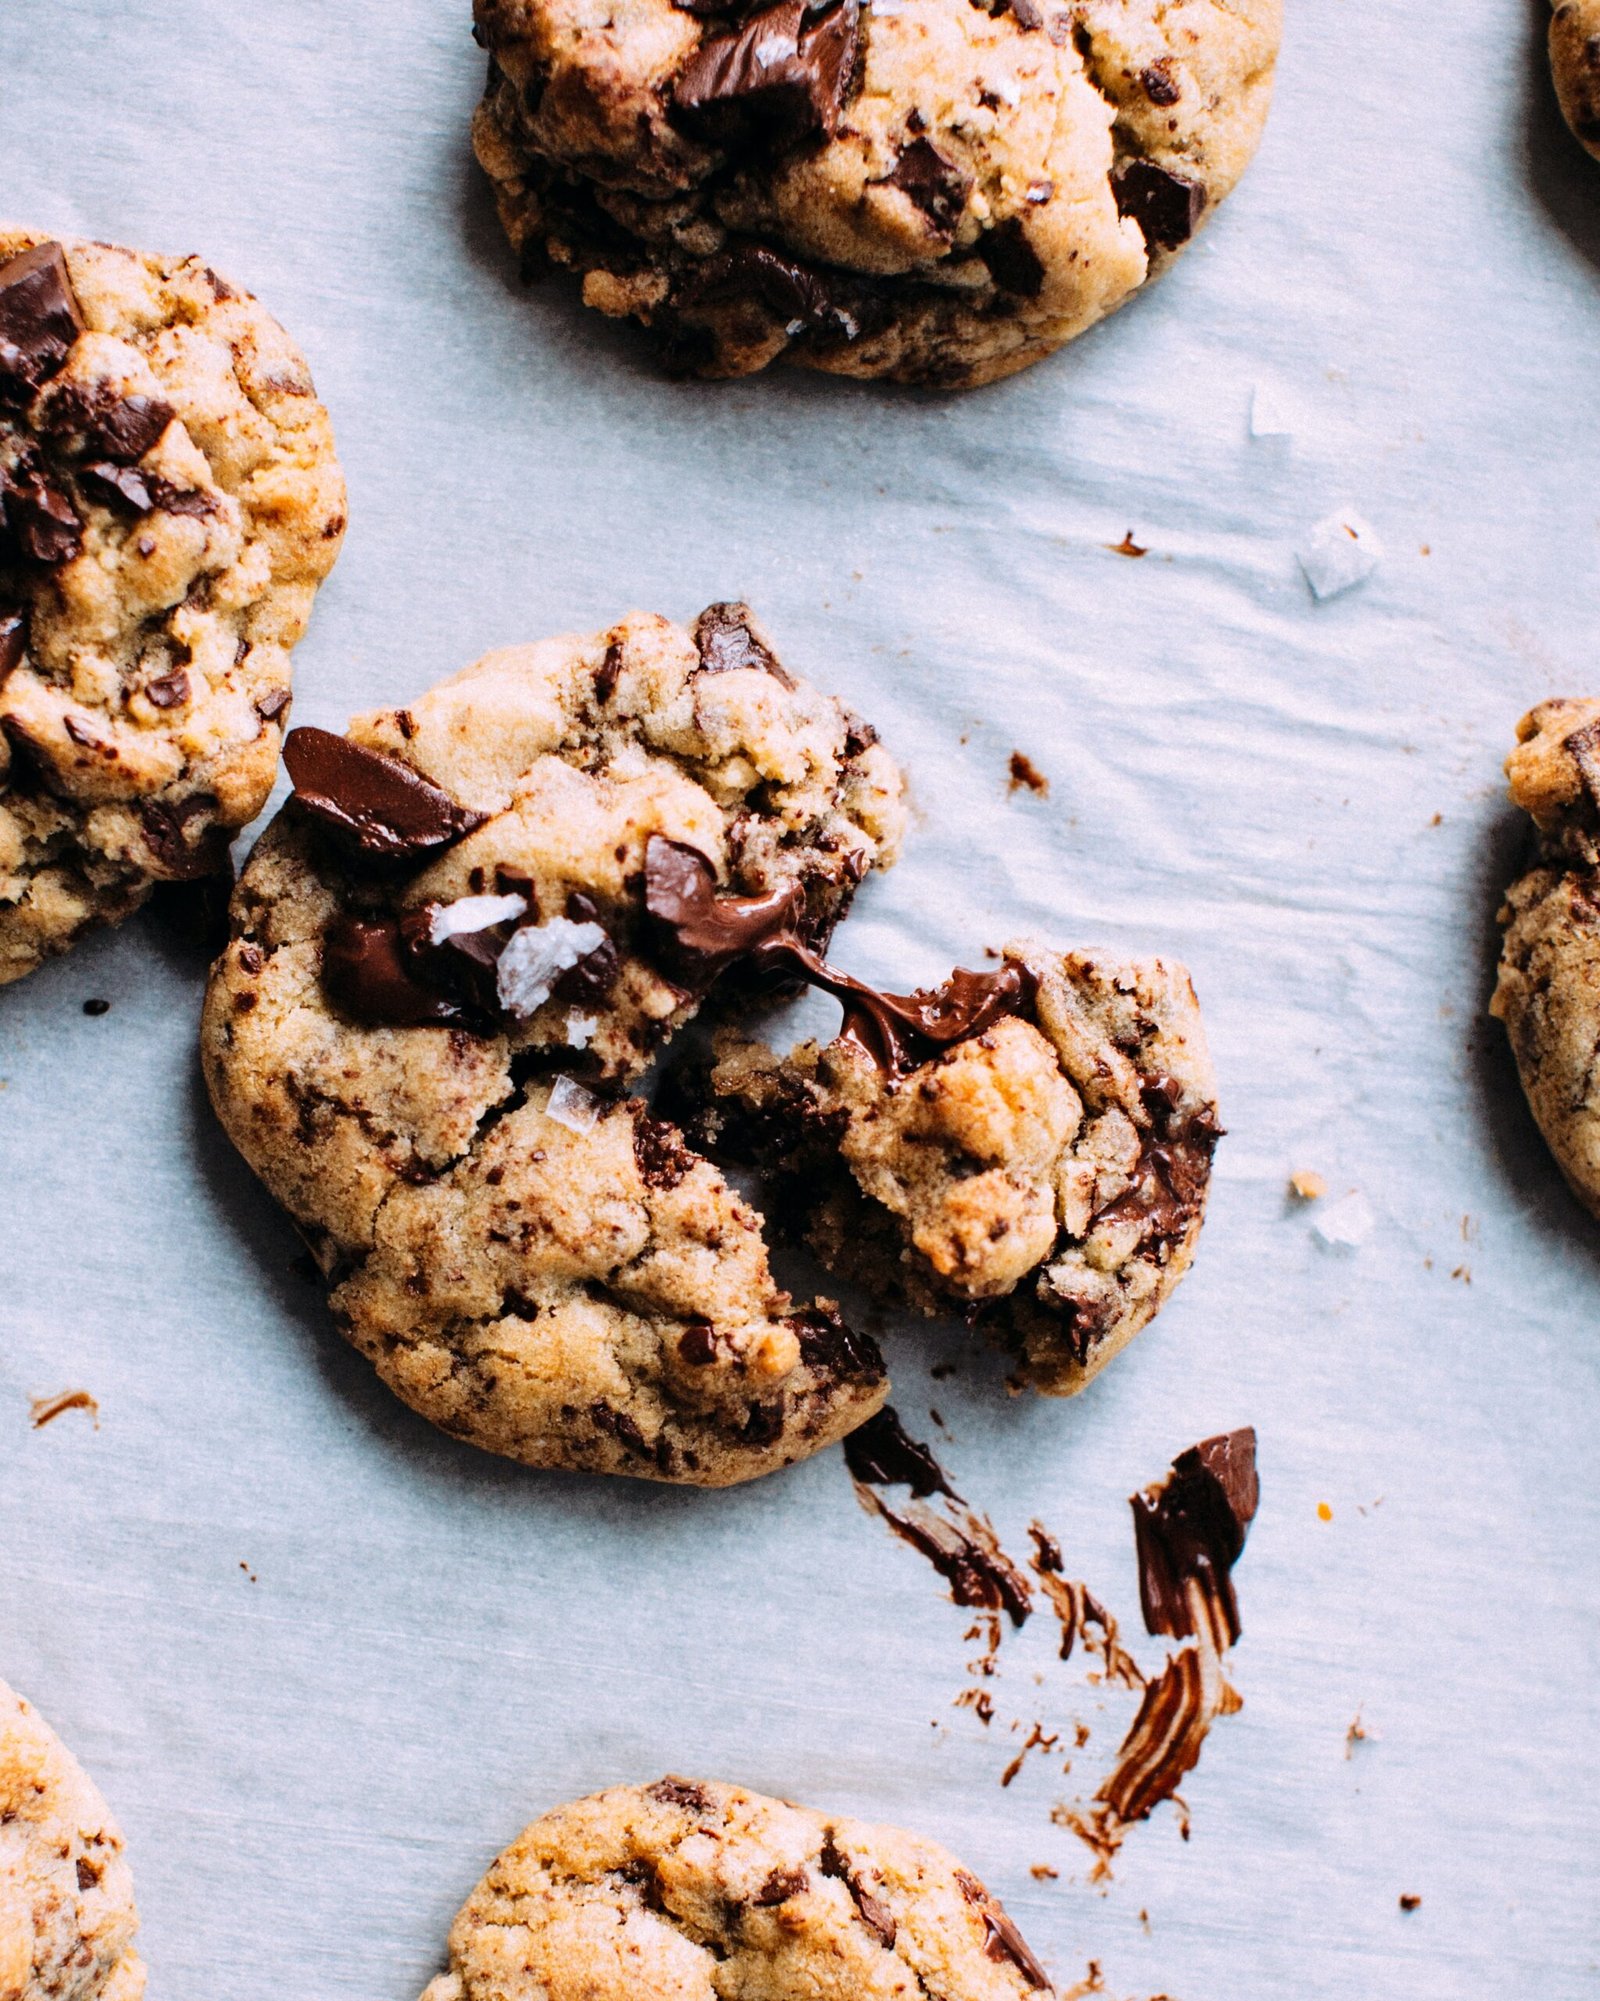 How to Bake the Ultimate Chocolate Chip Cookies